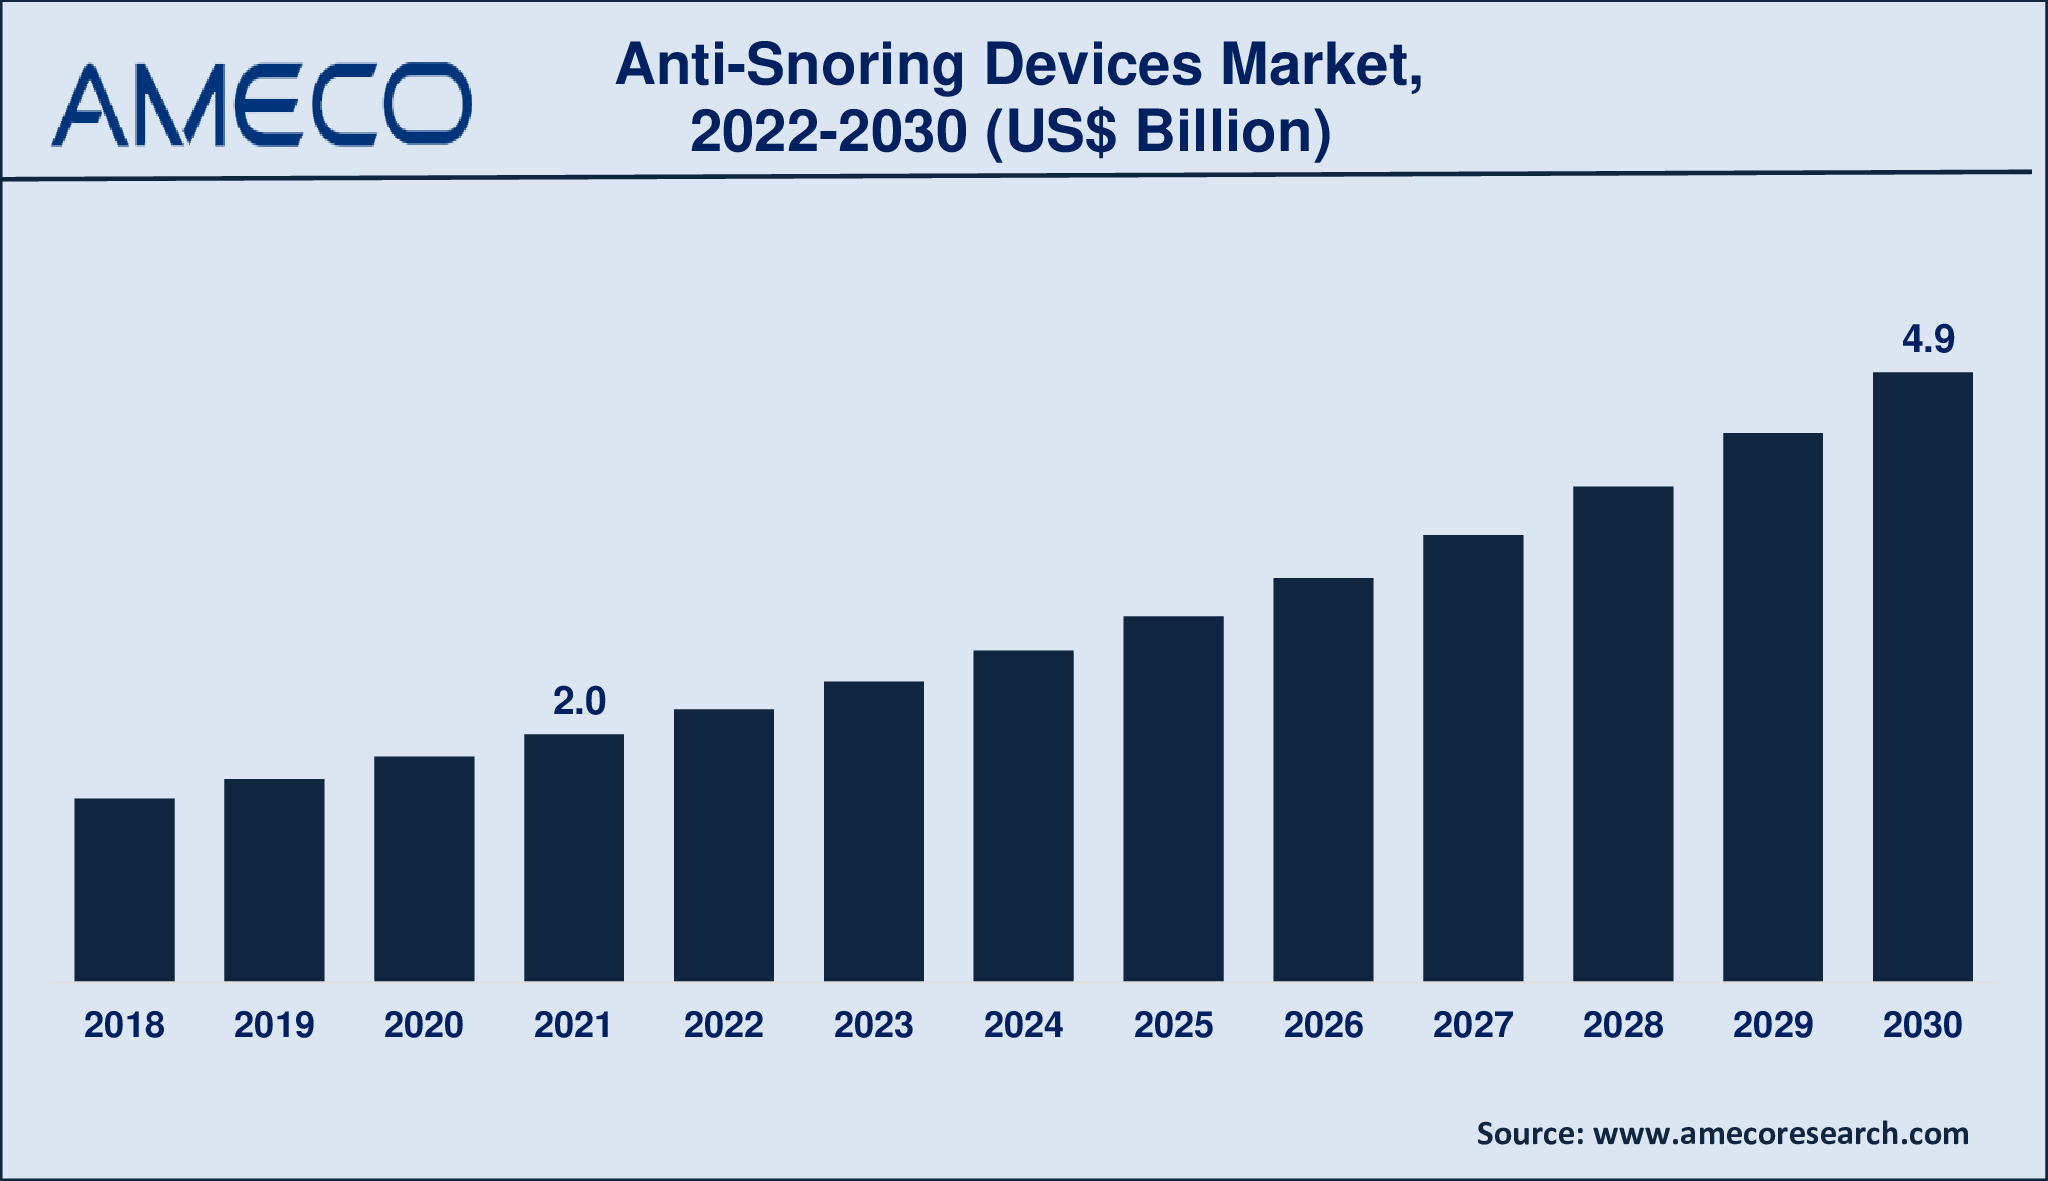 Anti-Snoring Devices Market Size, Share, Growth, Trends, and Forecast 2022-2030